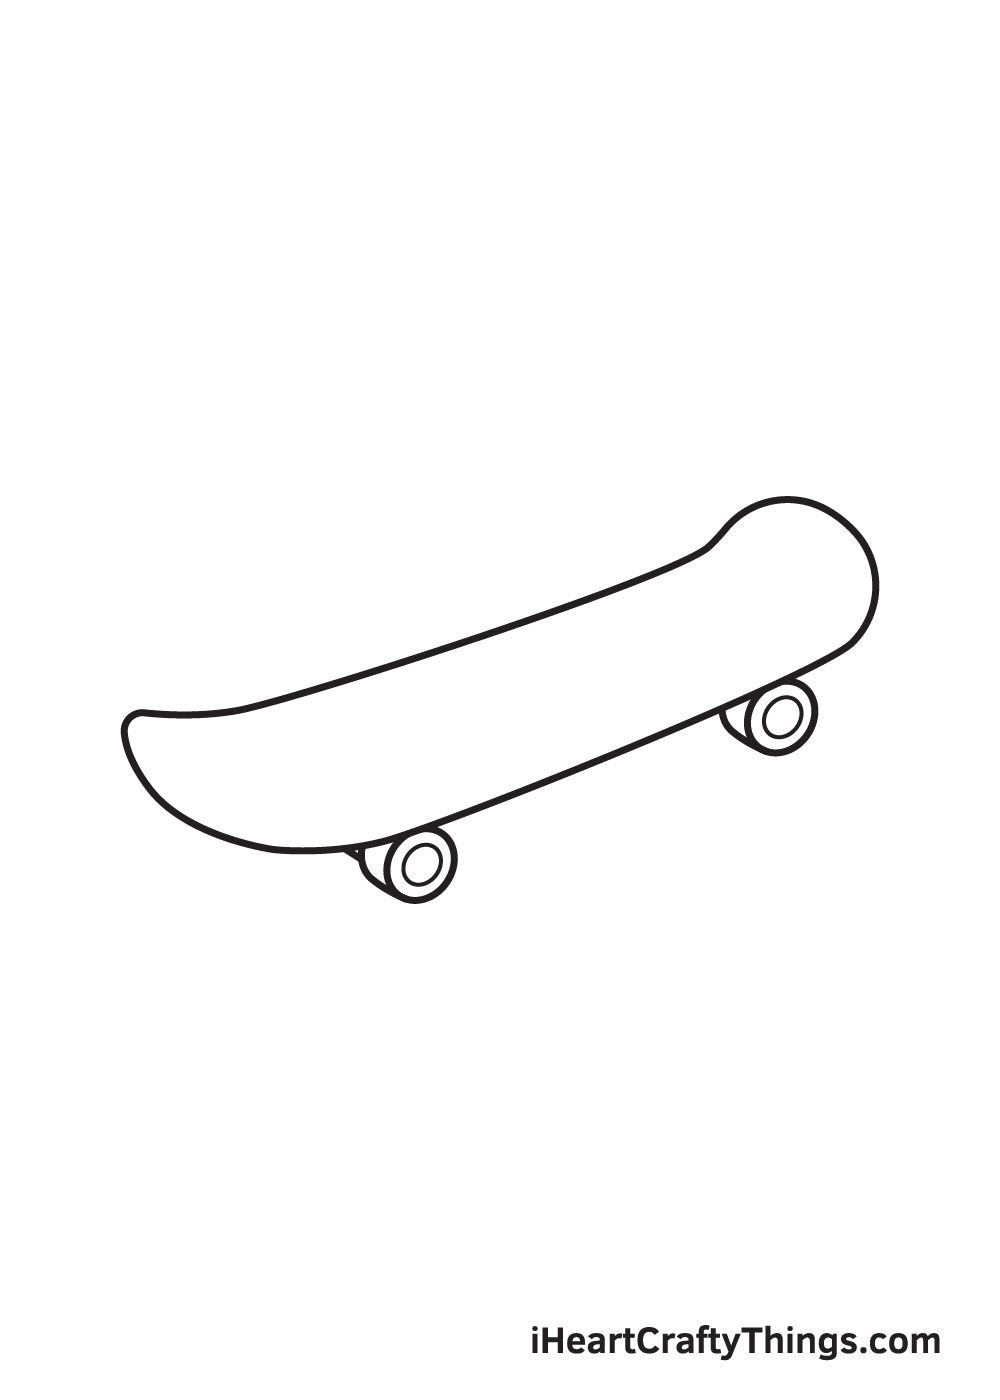 Drawing - Draw A Skateboard Step By Step